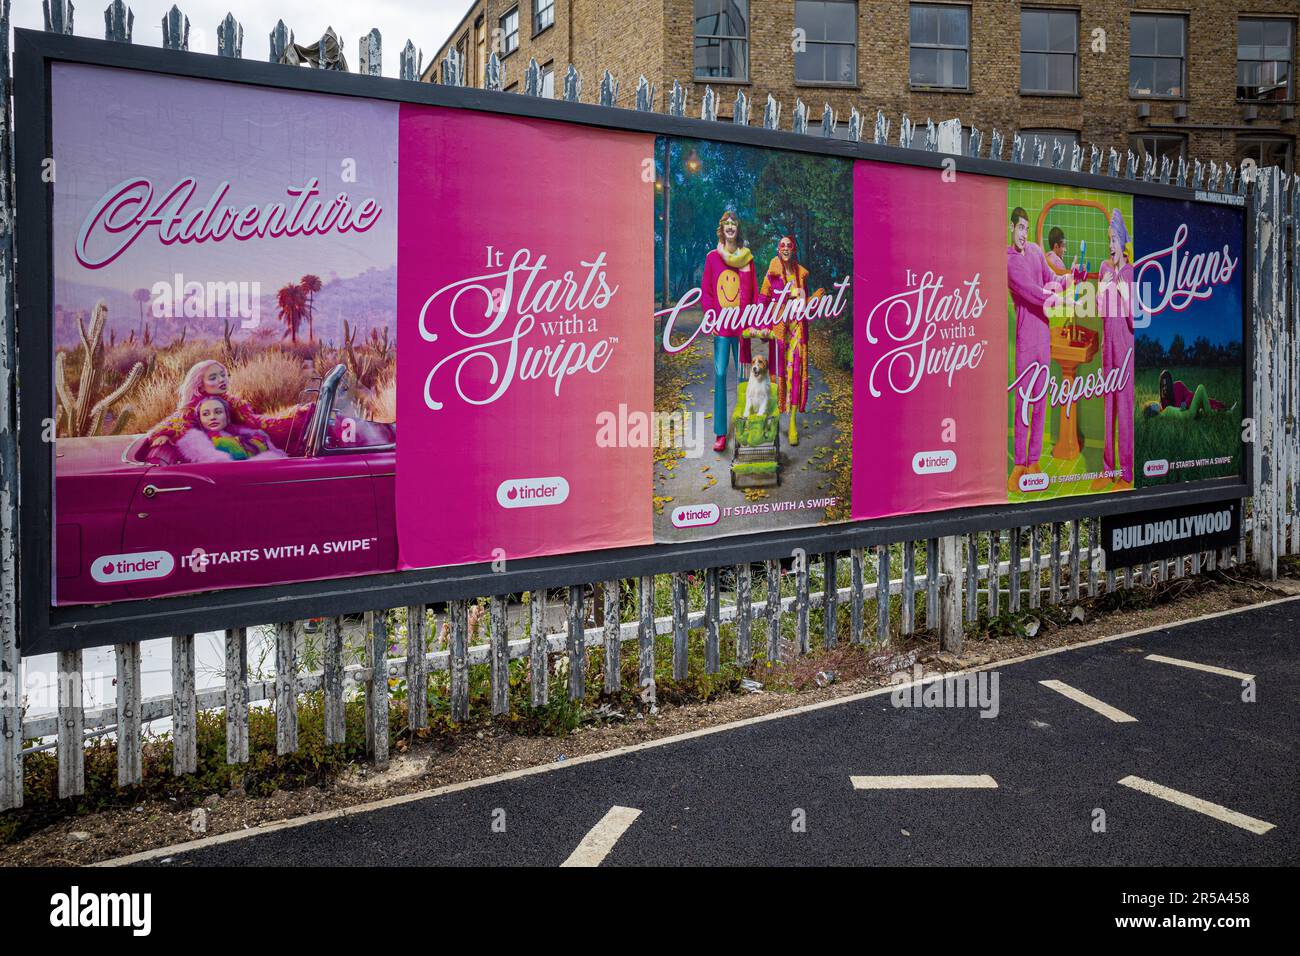 Tinder Ads London - Advertising for the Tinder Dating service in Shoreditch East London UK. Advertising Agency Mischief. Stock Photo